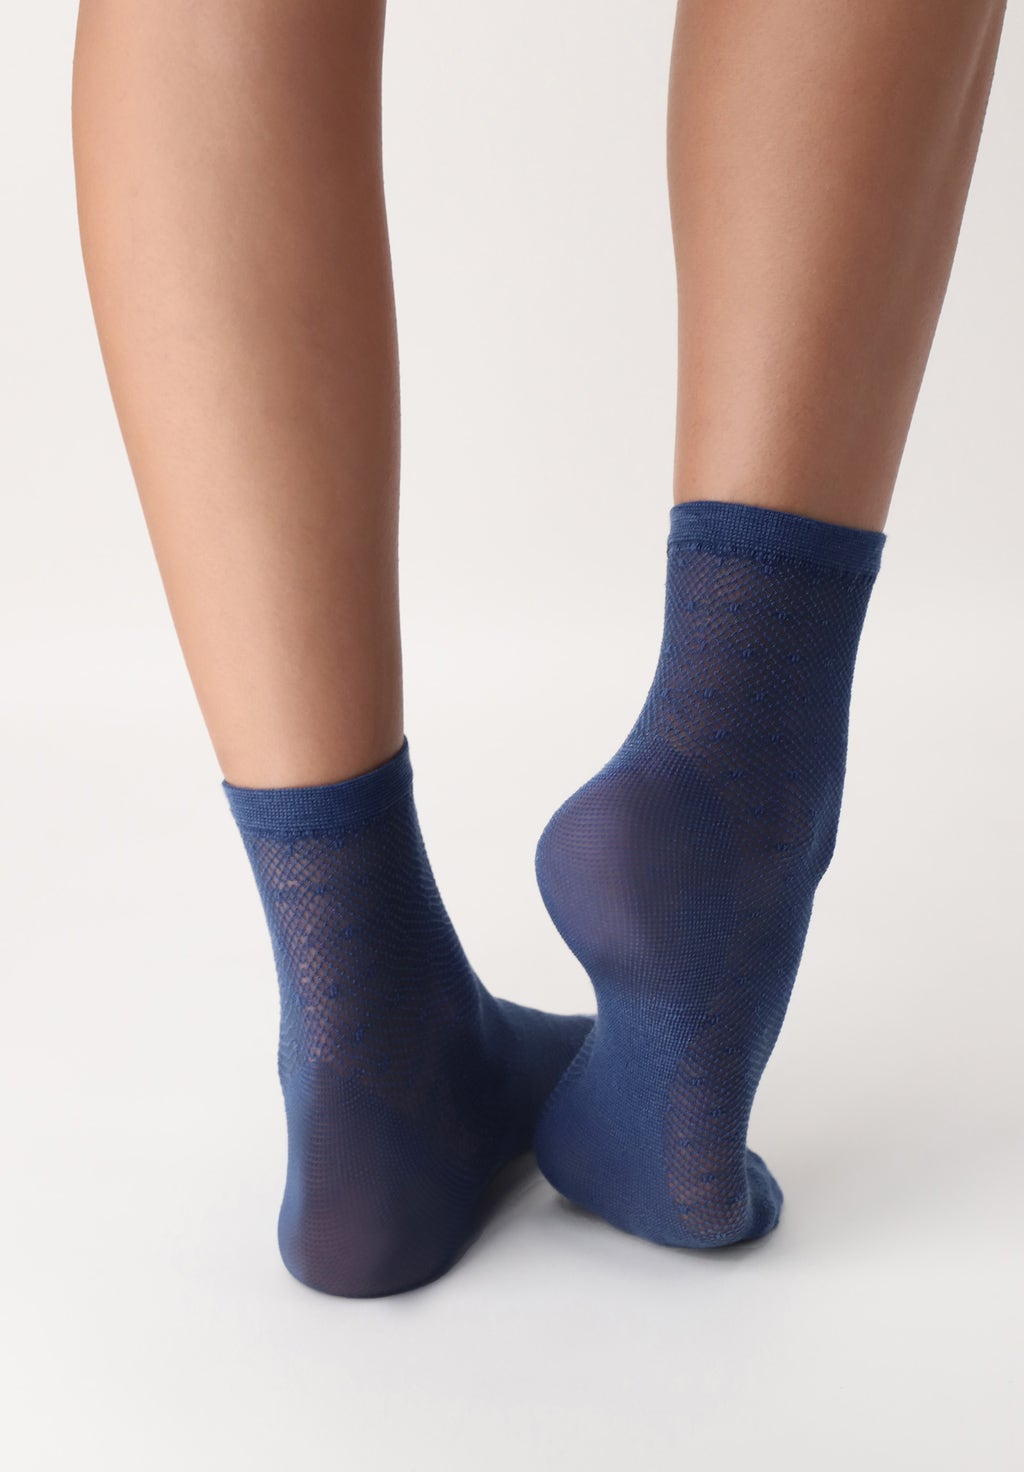 OroblÌ_ Eco Sneaker Sock - Blue marine environmentally friendly fashion quarter high ankle socks made of recycled yarn with a semi-sheer micro-mesh base, woven all over spot pattern, plain under foot, thin cuff and shaped heel.